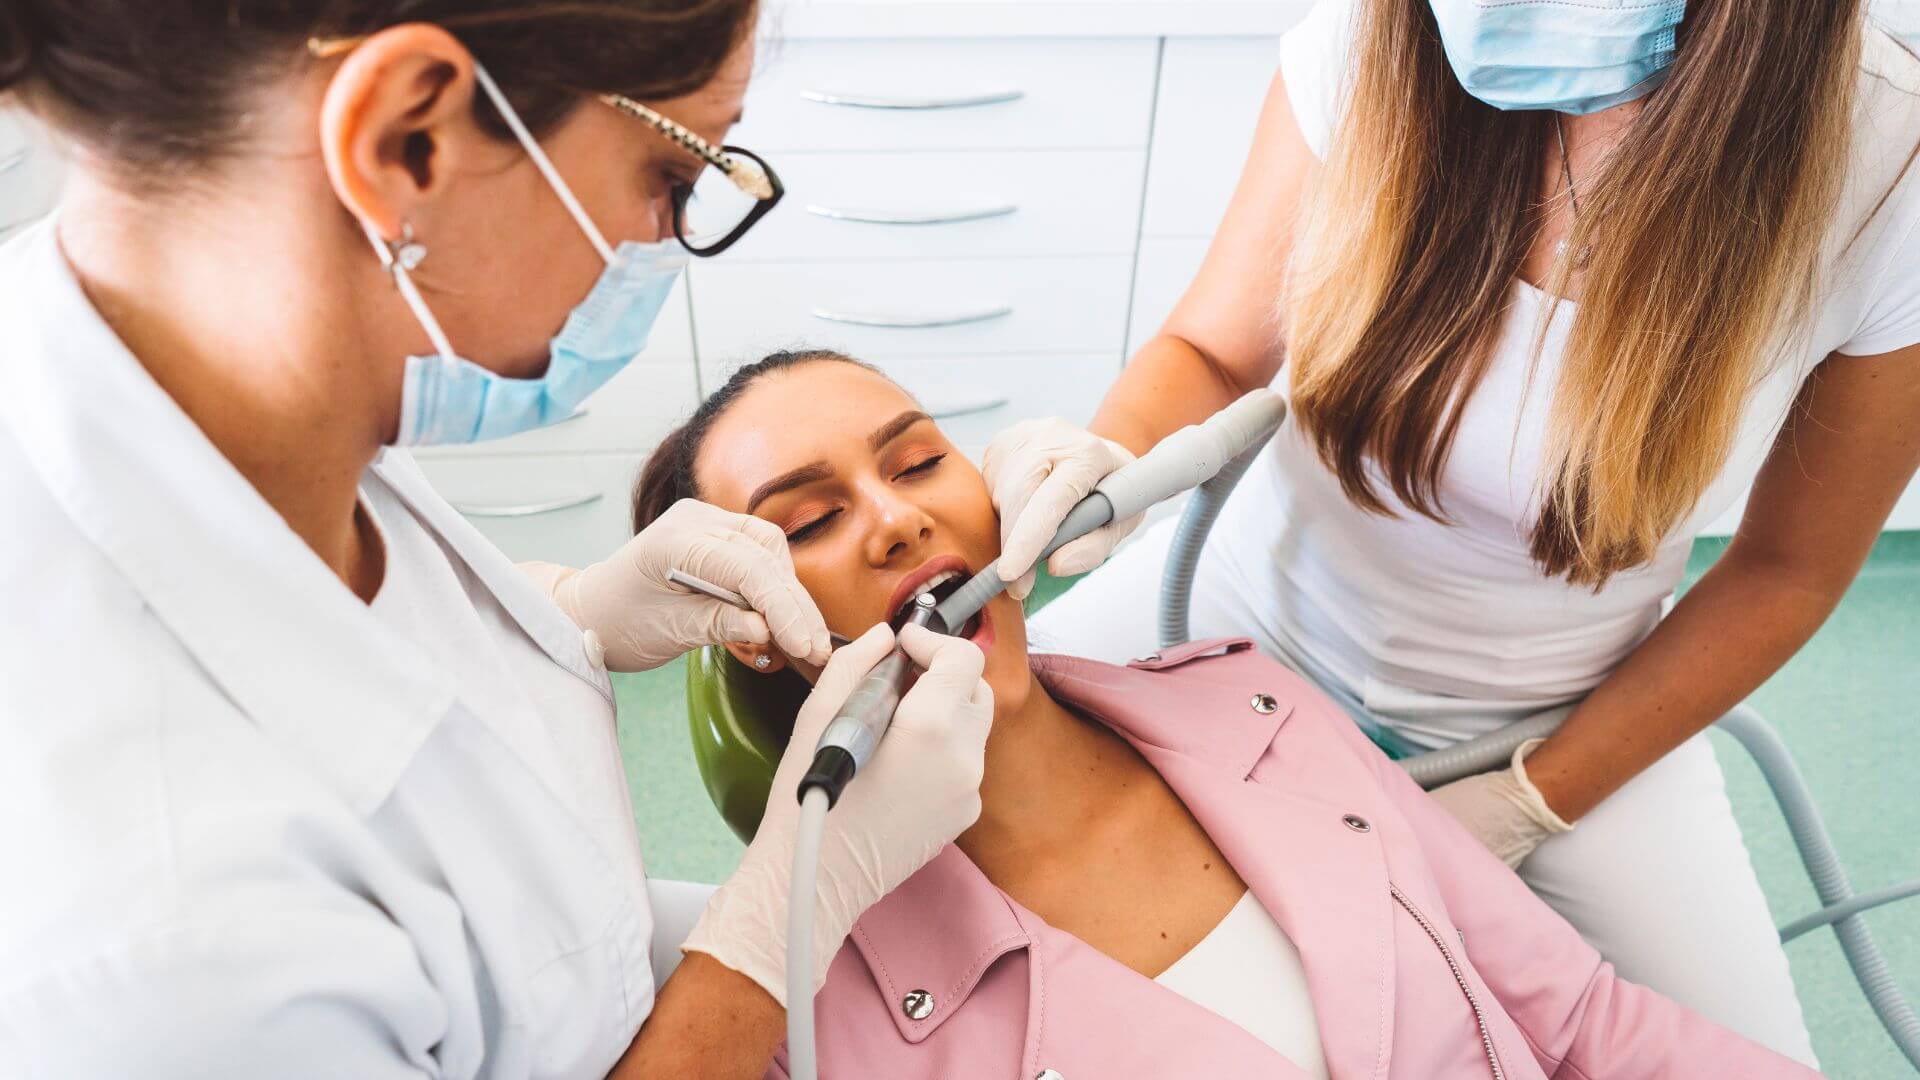 A woman having her teeth cleaned by a dentist and hygienist. - Dentist